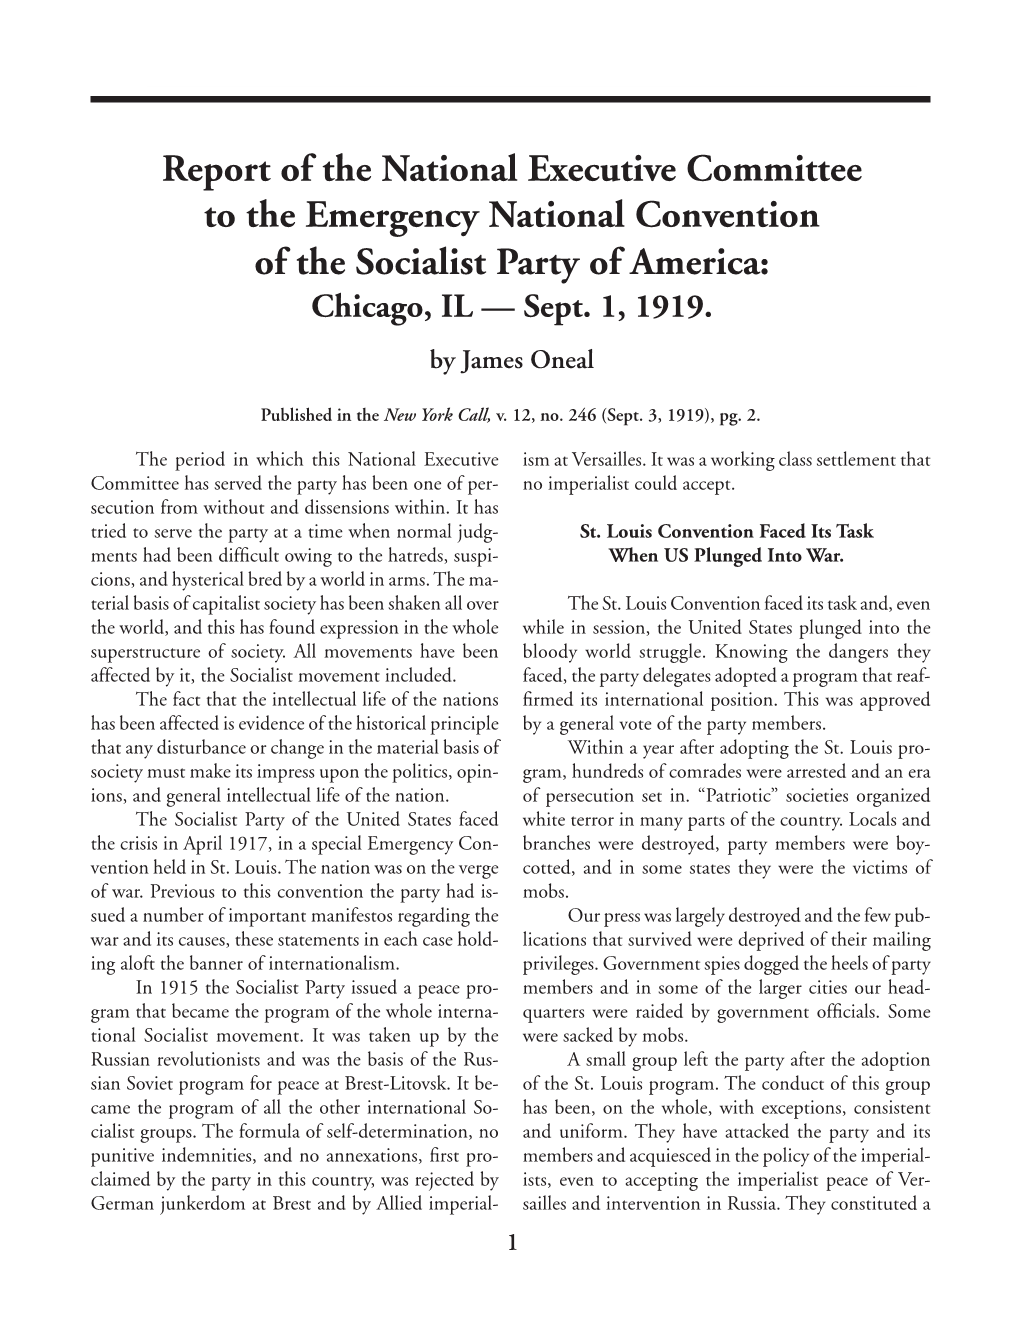 Report of the National Executive Committee to the Emergency National Convention of the Socialist Party of America: Chicago, IL — Sept